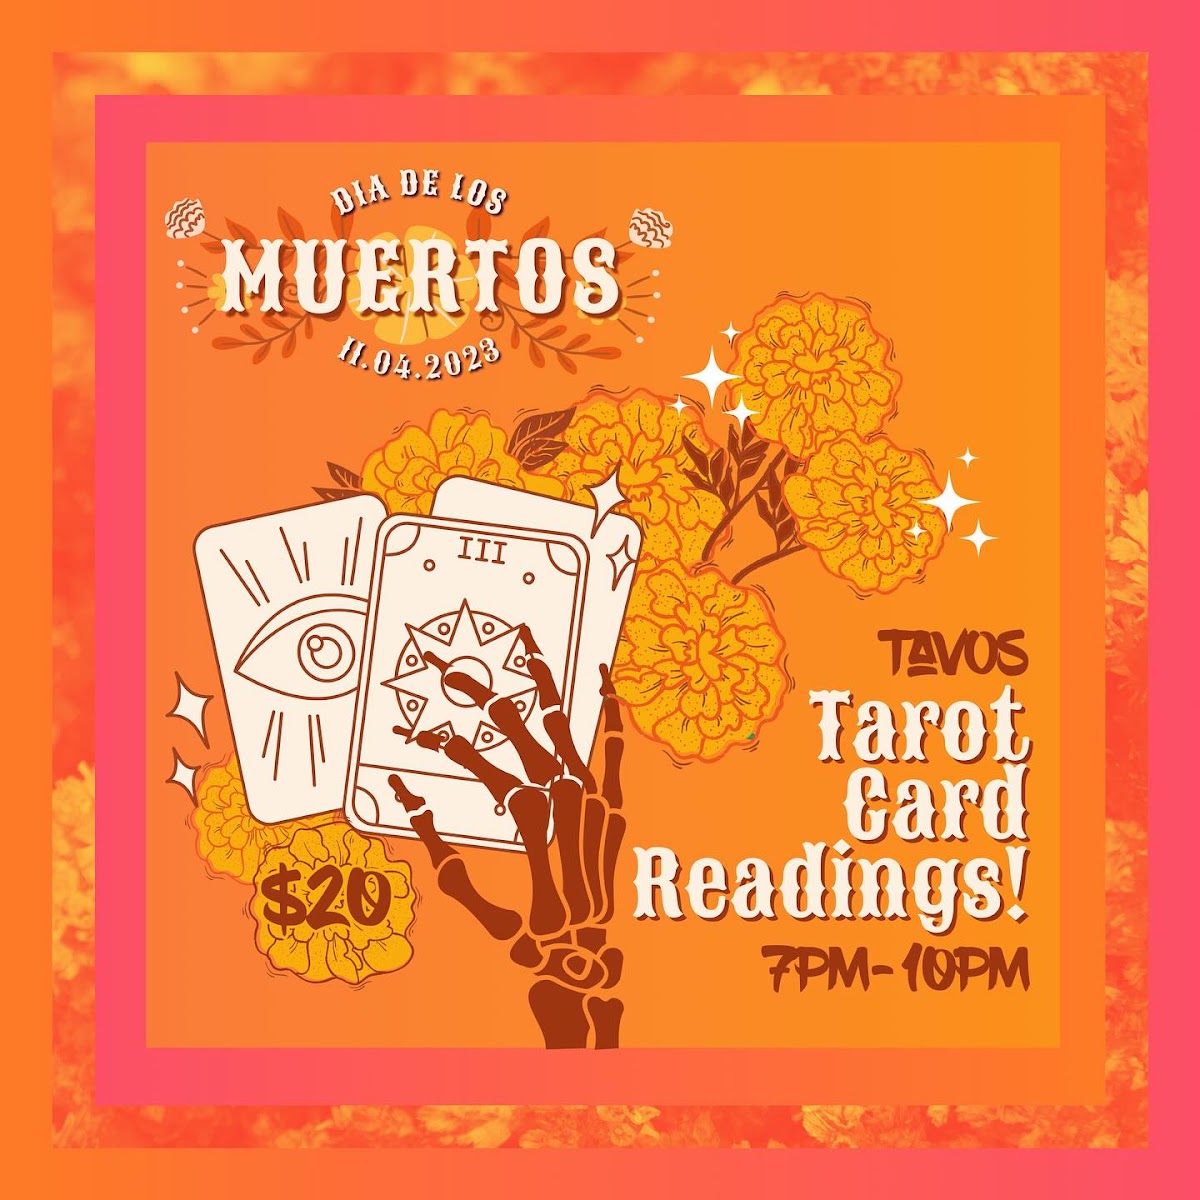 During our celebration on November 4th, from 7pm to 10pm, we are offering special Tarot Card Readings – a glimpse into the spiritual world and a connection to our ancestors. 🃏✨